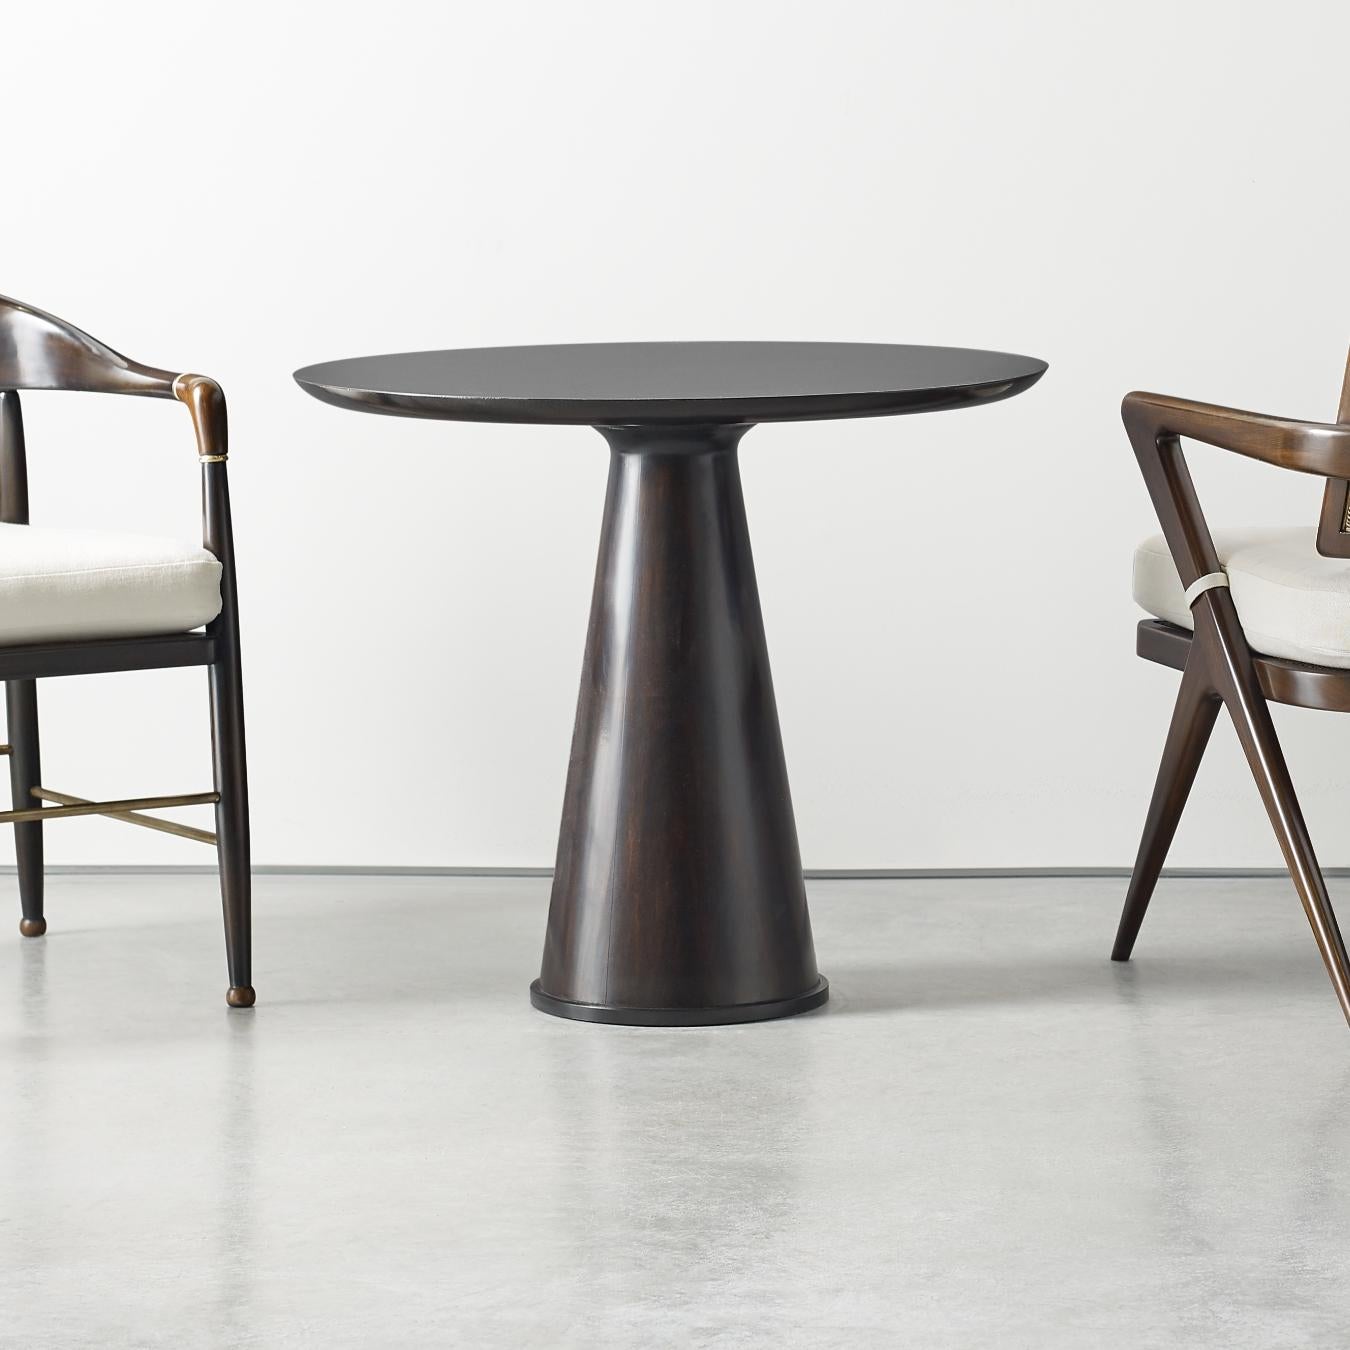 This circular occasional table with a conic base is perfect for any setting and comes in two different finishes.
 